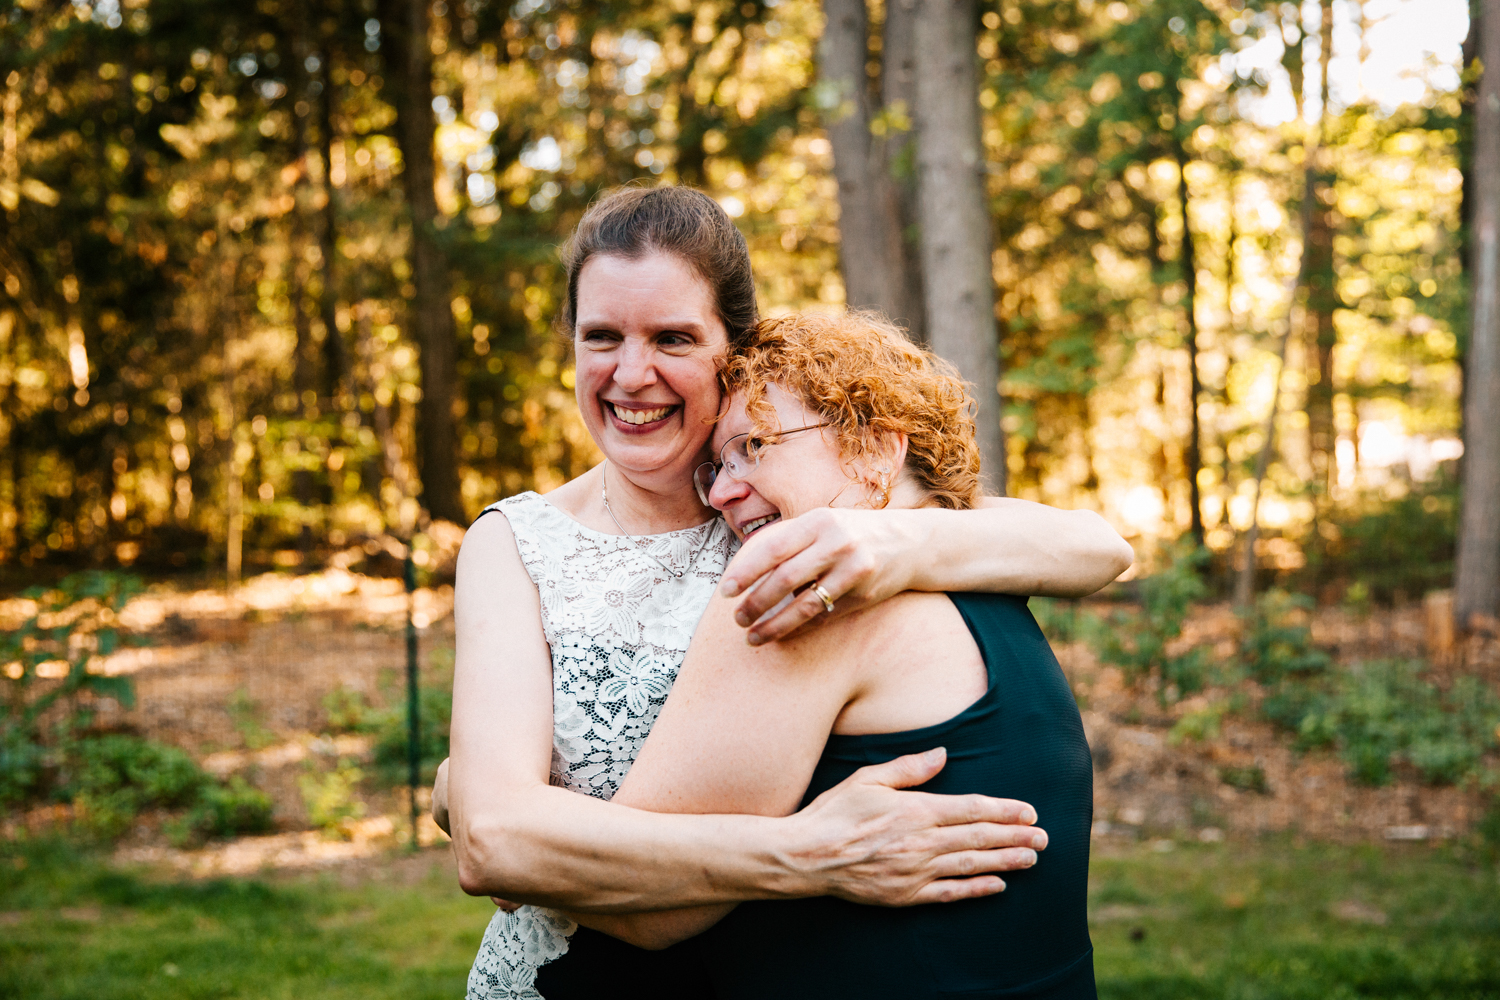 guests-mother-hug-emotions-wedding-day-smile-granby-new-england-ct-ri-ma-wedding-photography.jpg